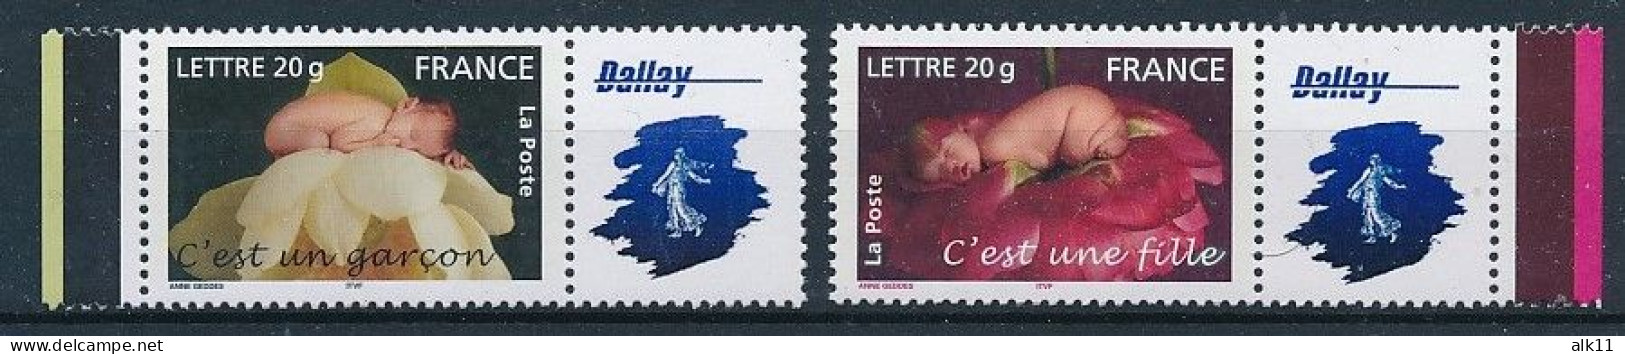 France 2005 - F3804Aa 3805Aa Deux Timbres Fille Et Garcon Personnalisés Logo Dallay  - Neuf - Nuovi